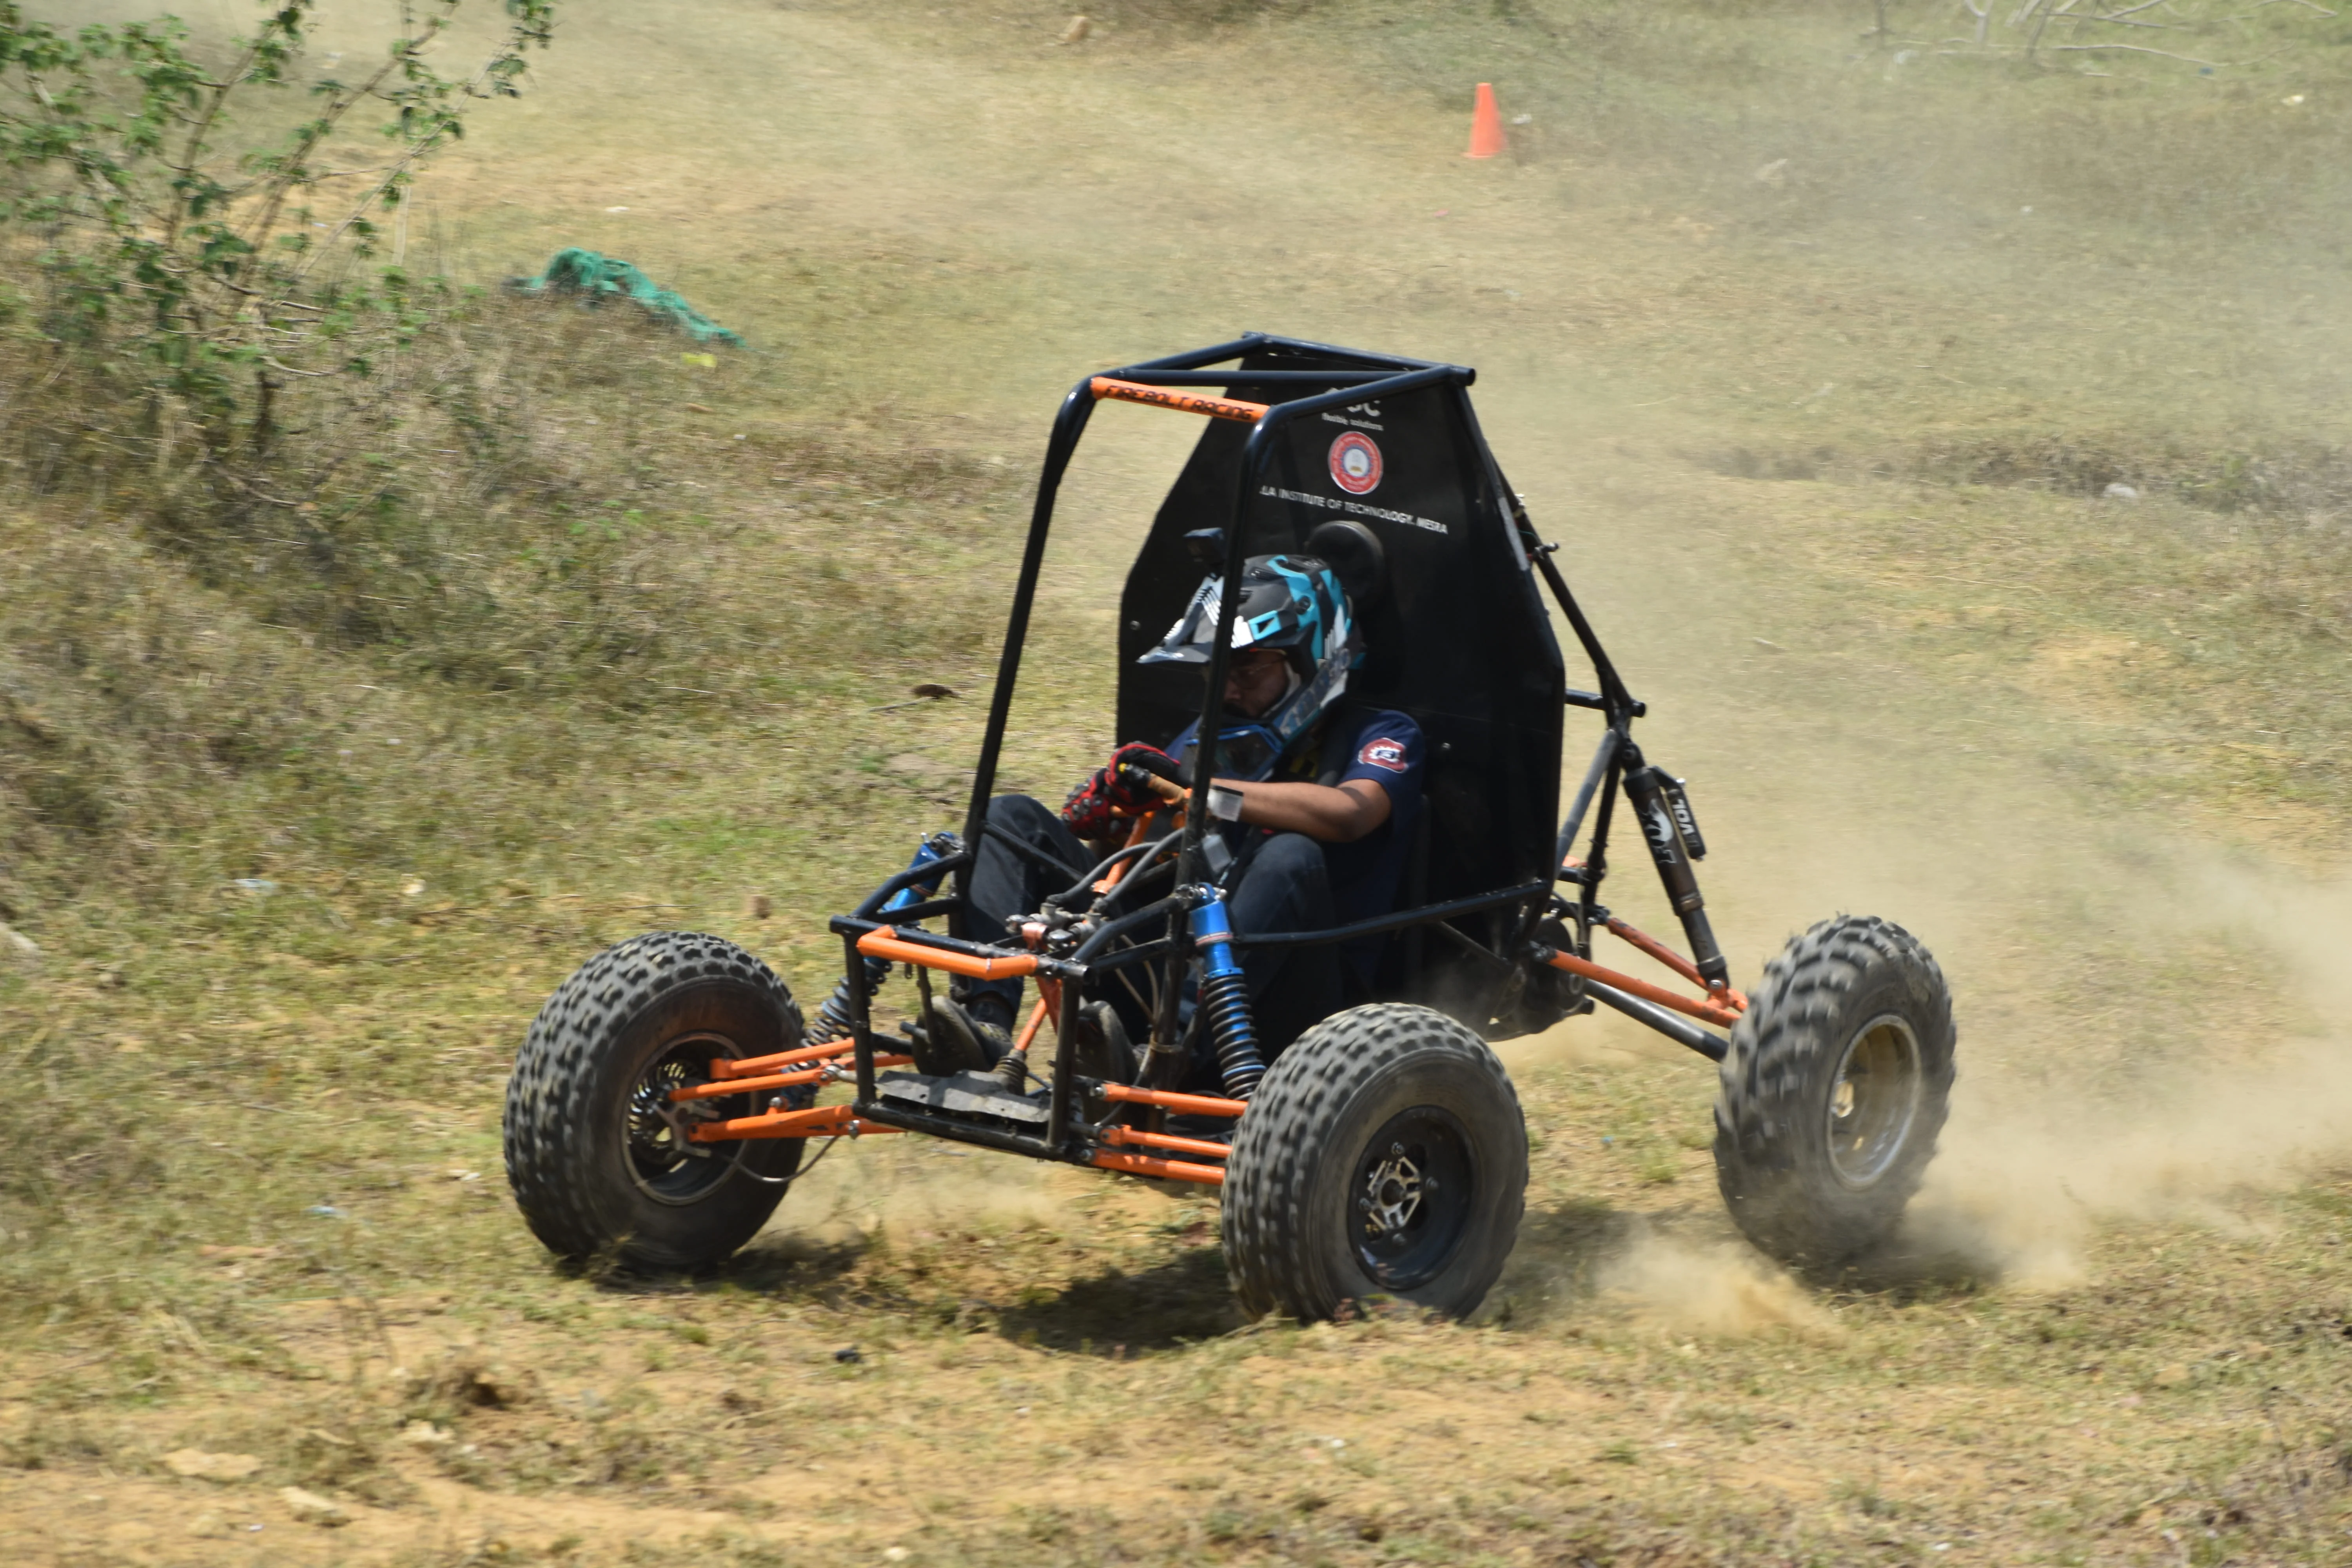 High performance of the ATV on the field